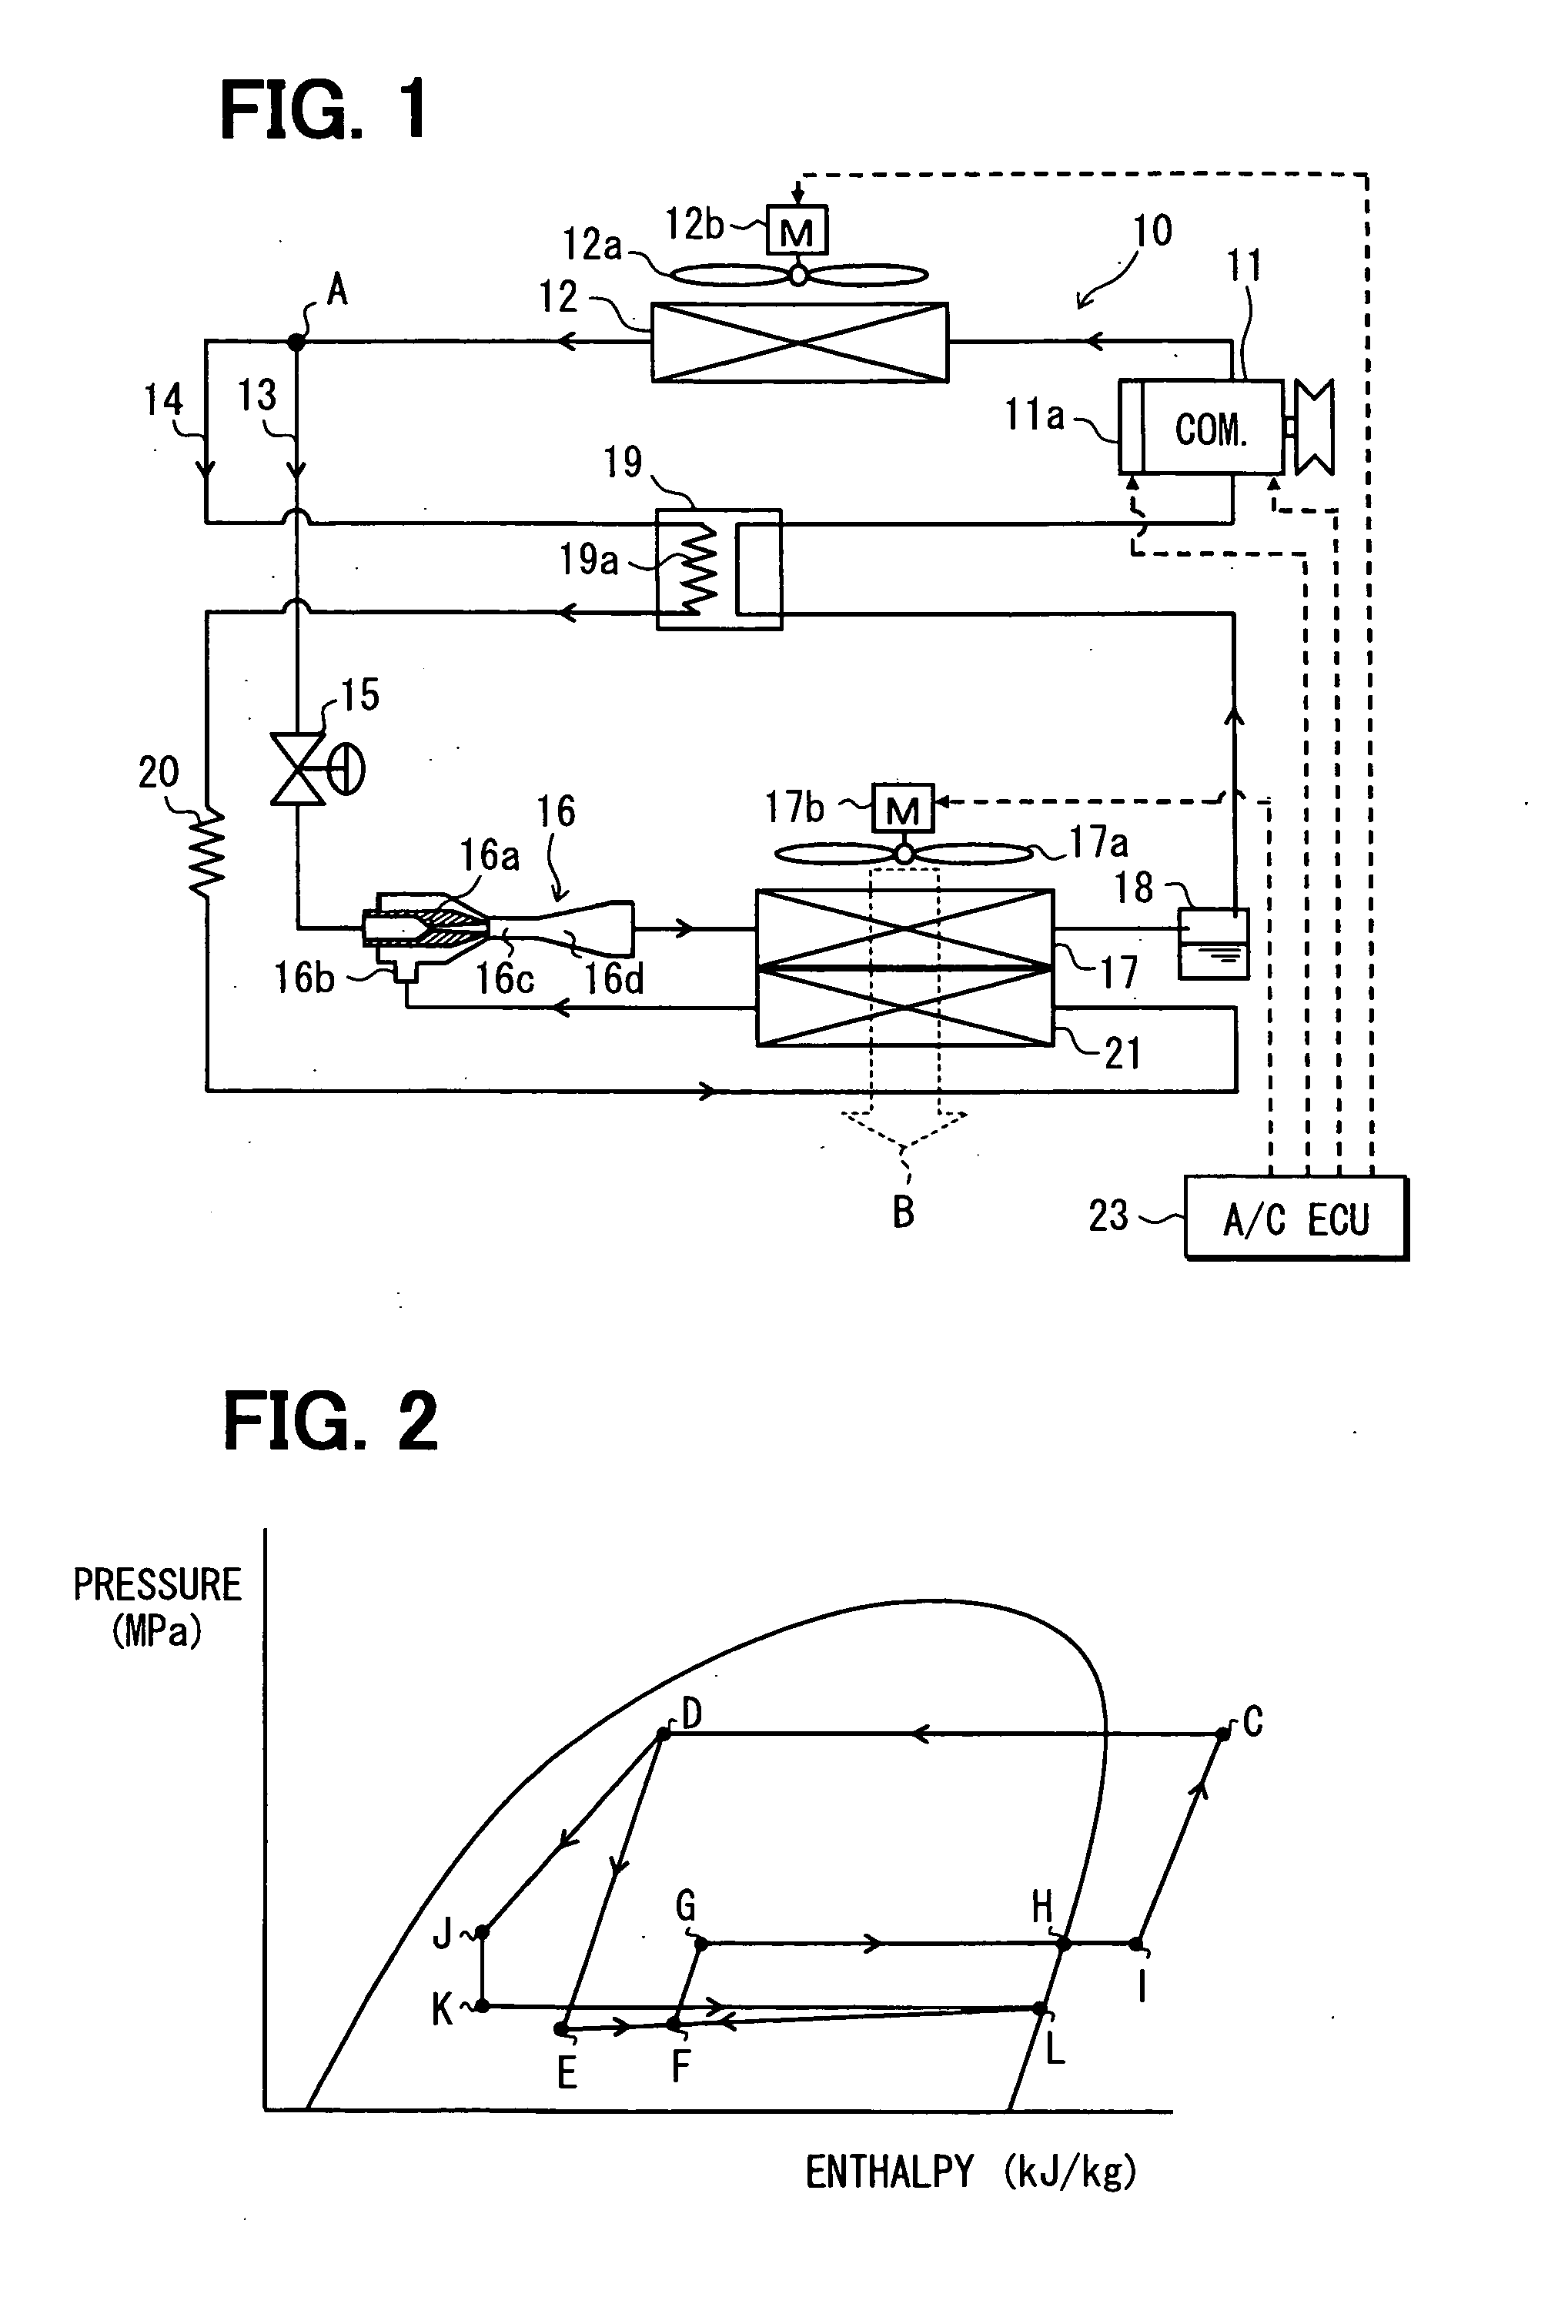 Ejector refrigerant cycle device